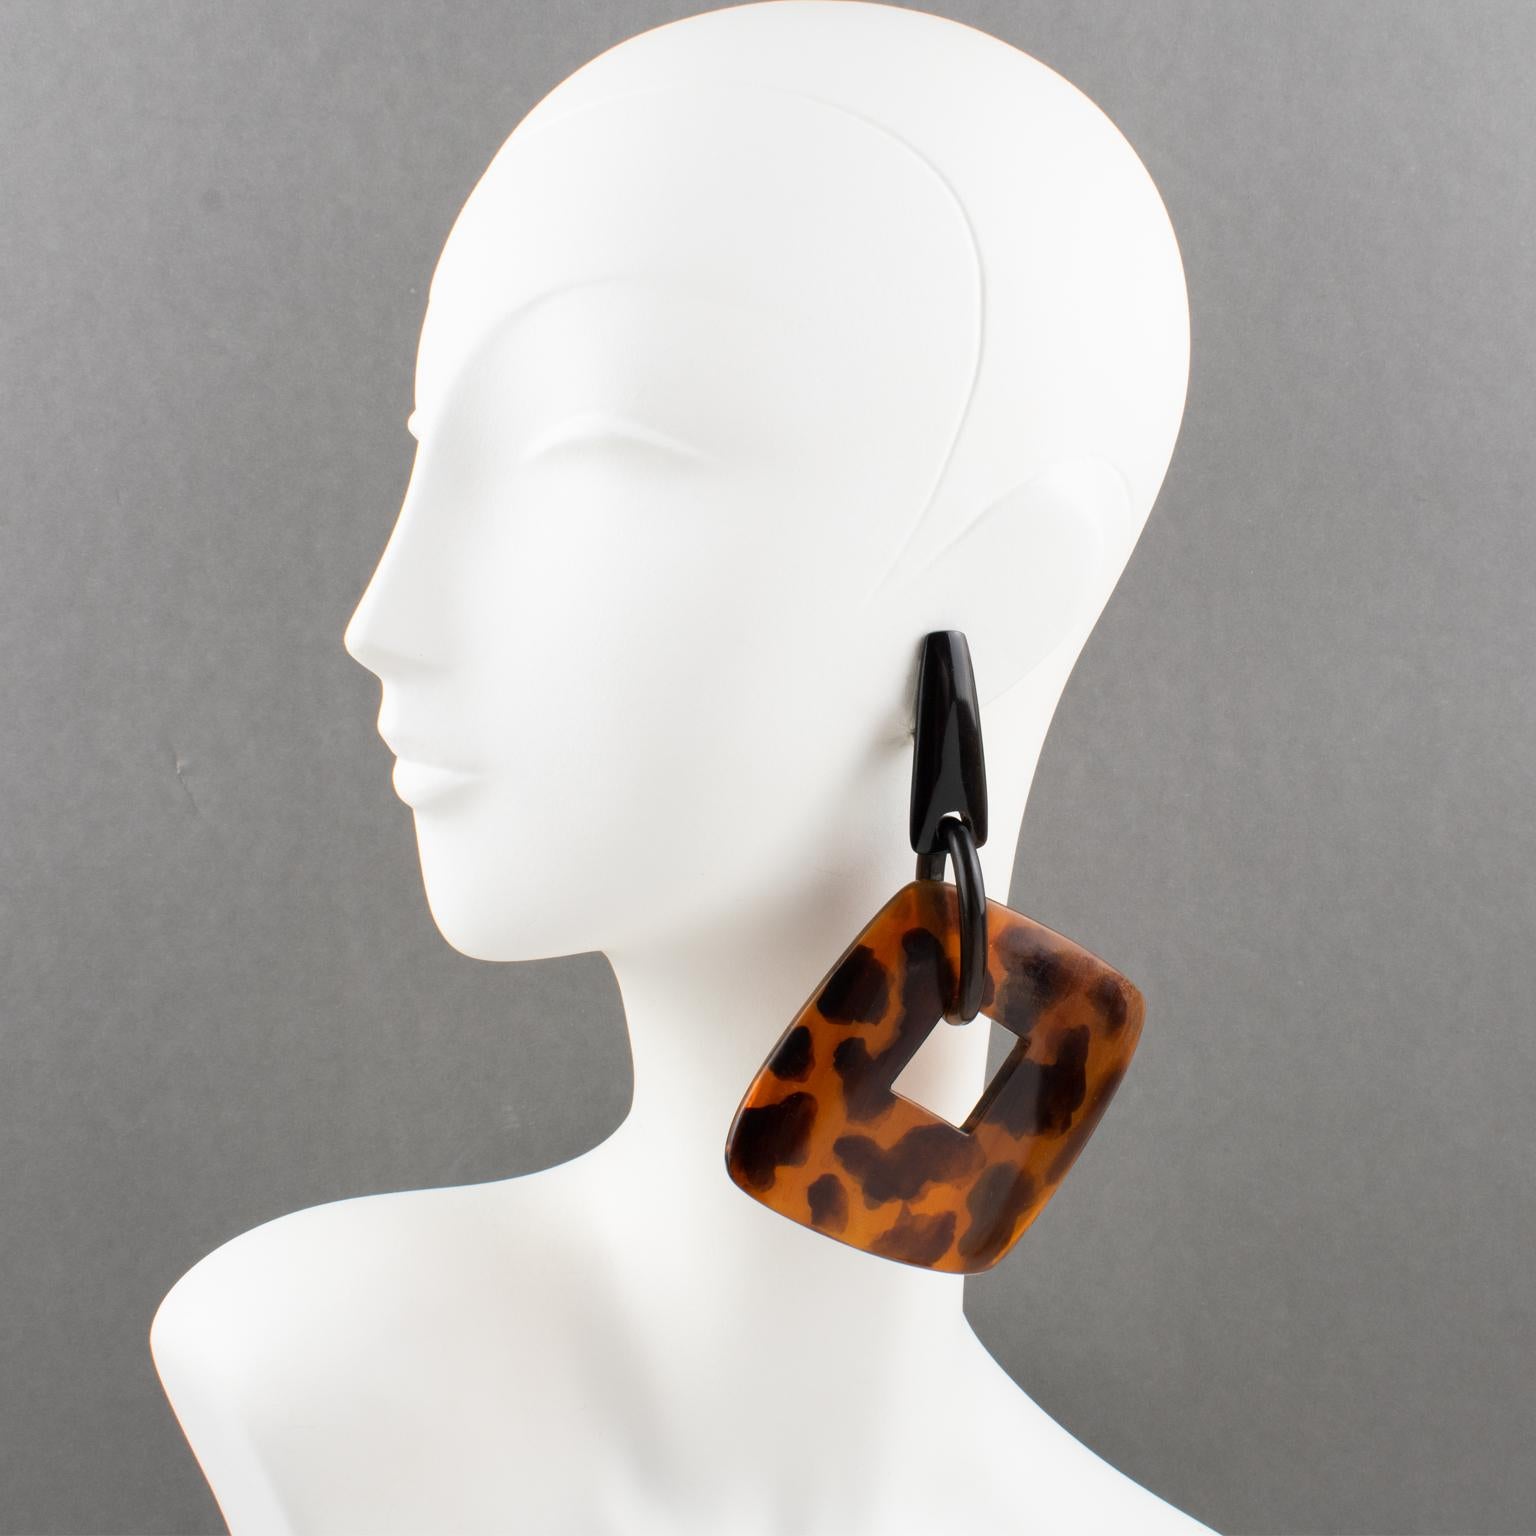 These beautiful oversized clip-on earrings by Gerda Lyngaard for Monies feature a dangling geometric shape with a massive square donut in tortoise (tortoiseshell) resin in a very organic flair. The geometric fastenings in resin are carved and